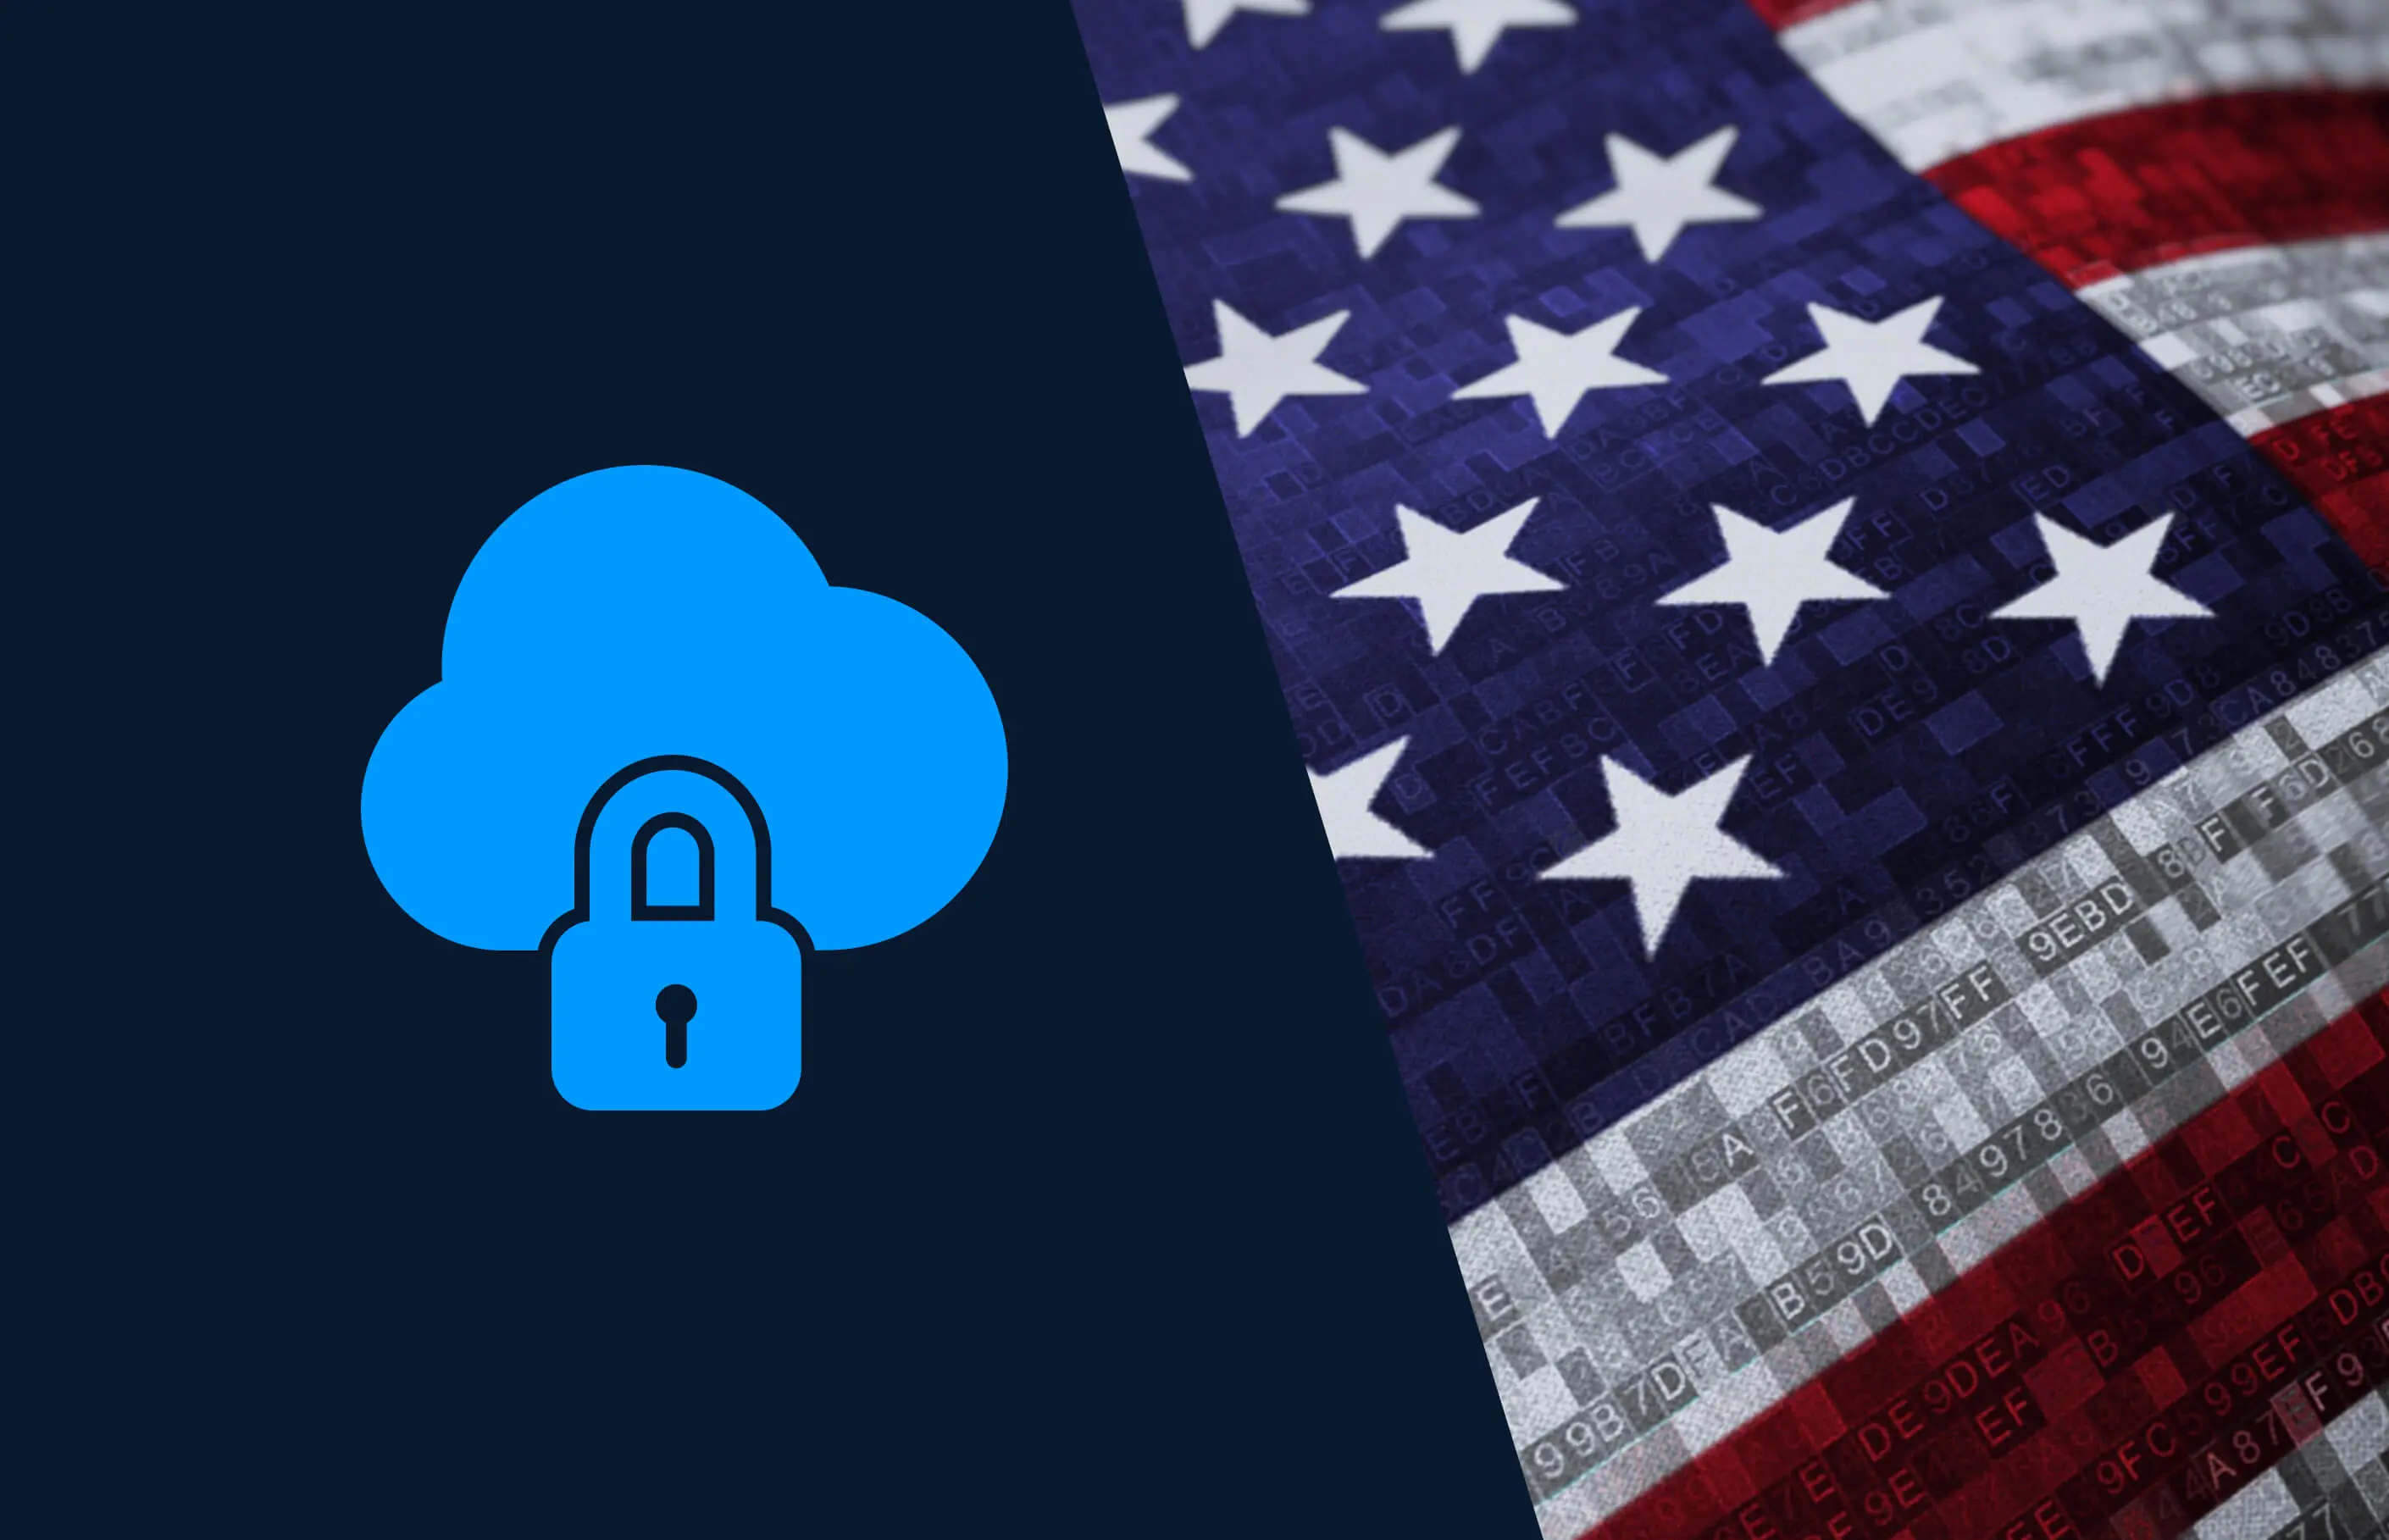 Secured government cloud symbol next to an American flag